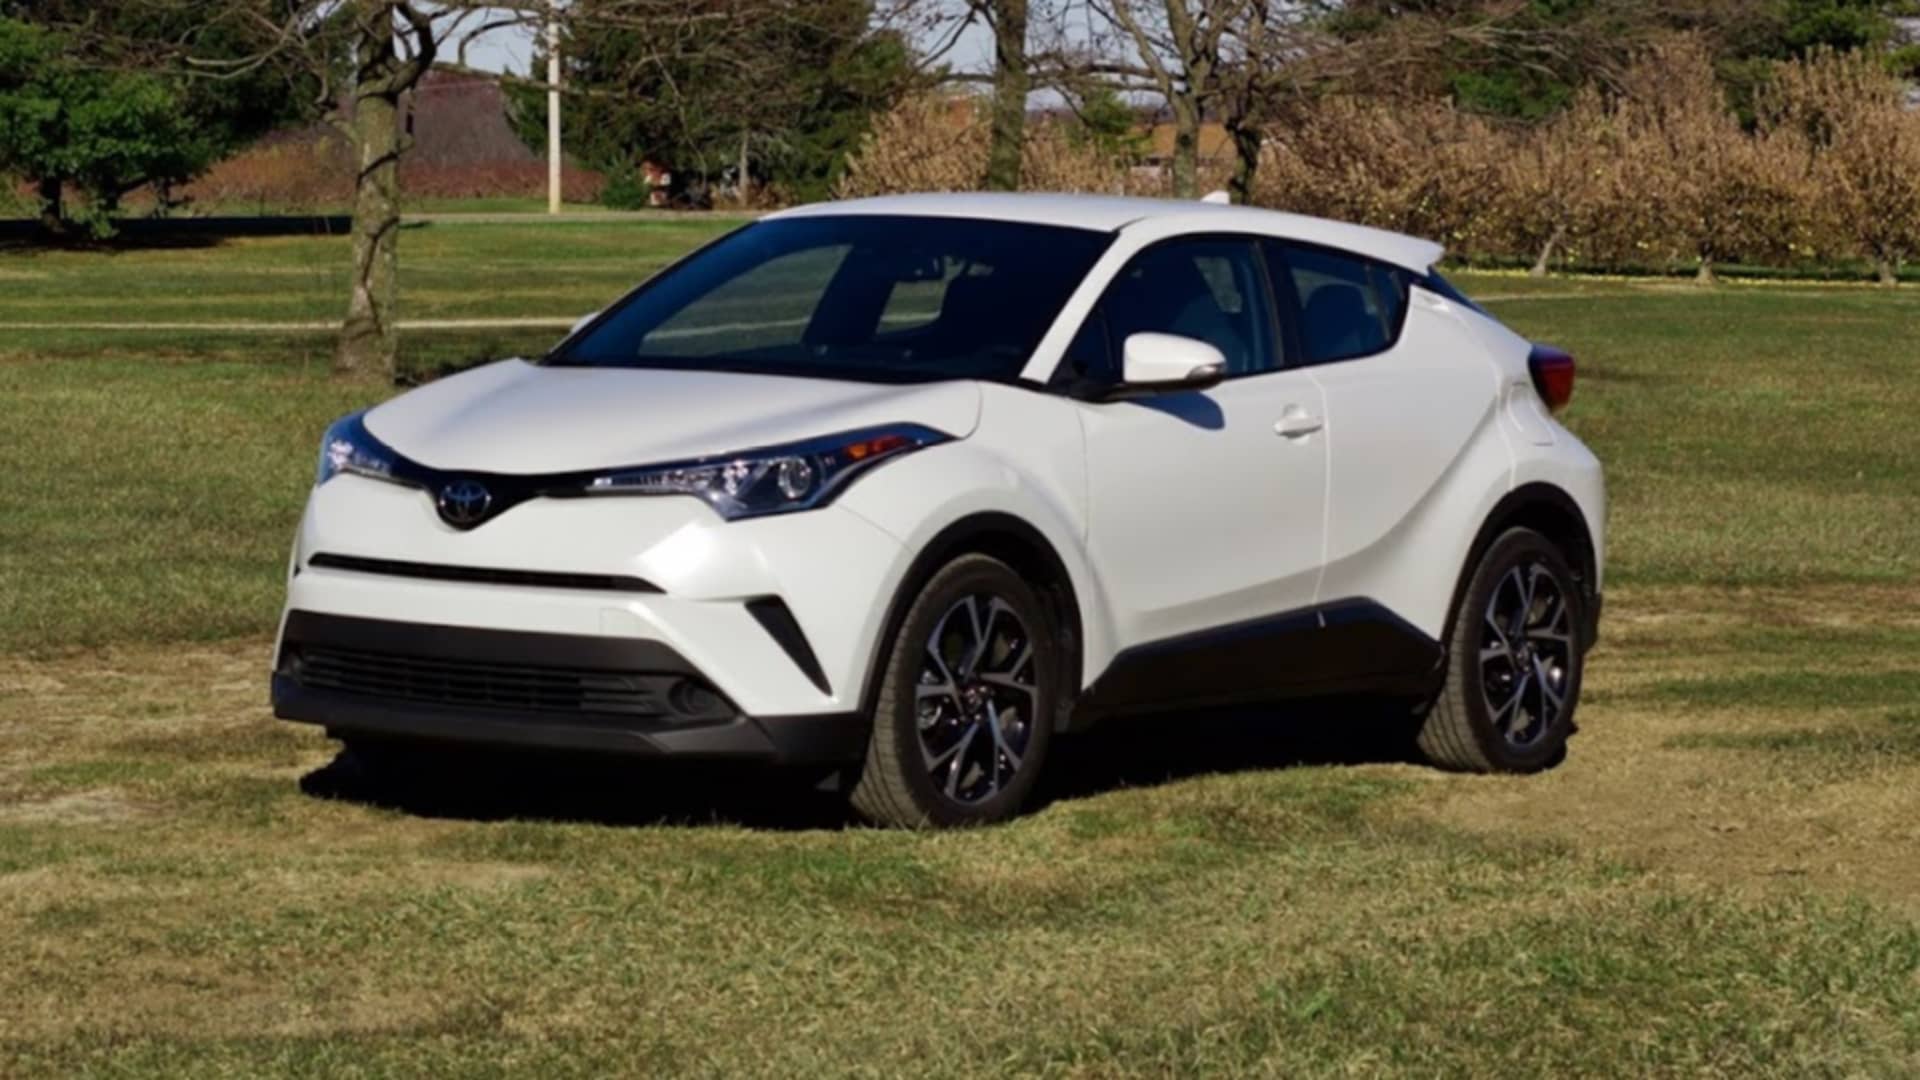 Interior And Details Of The Toyota C-HR Compact SUV Revealed